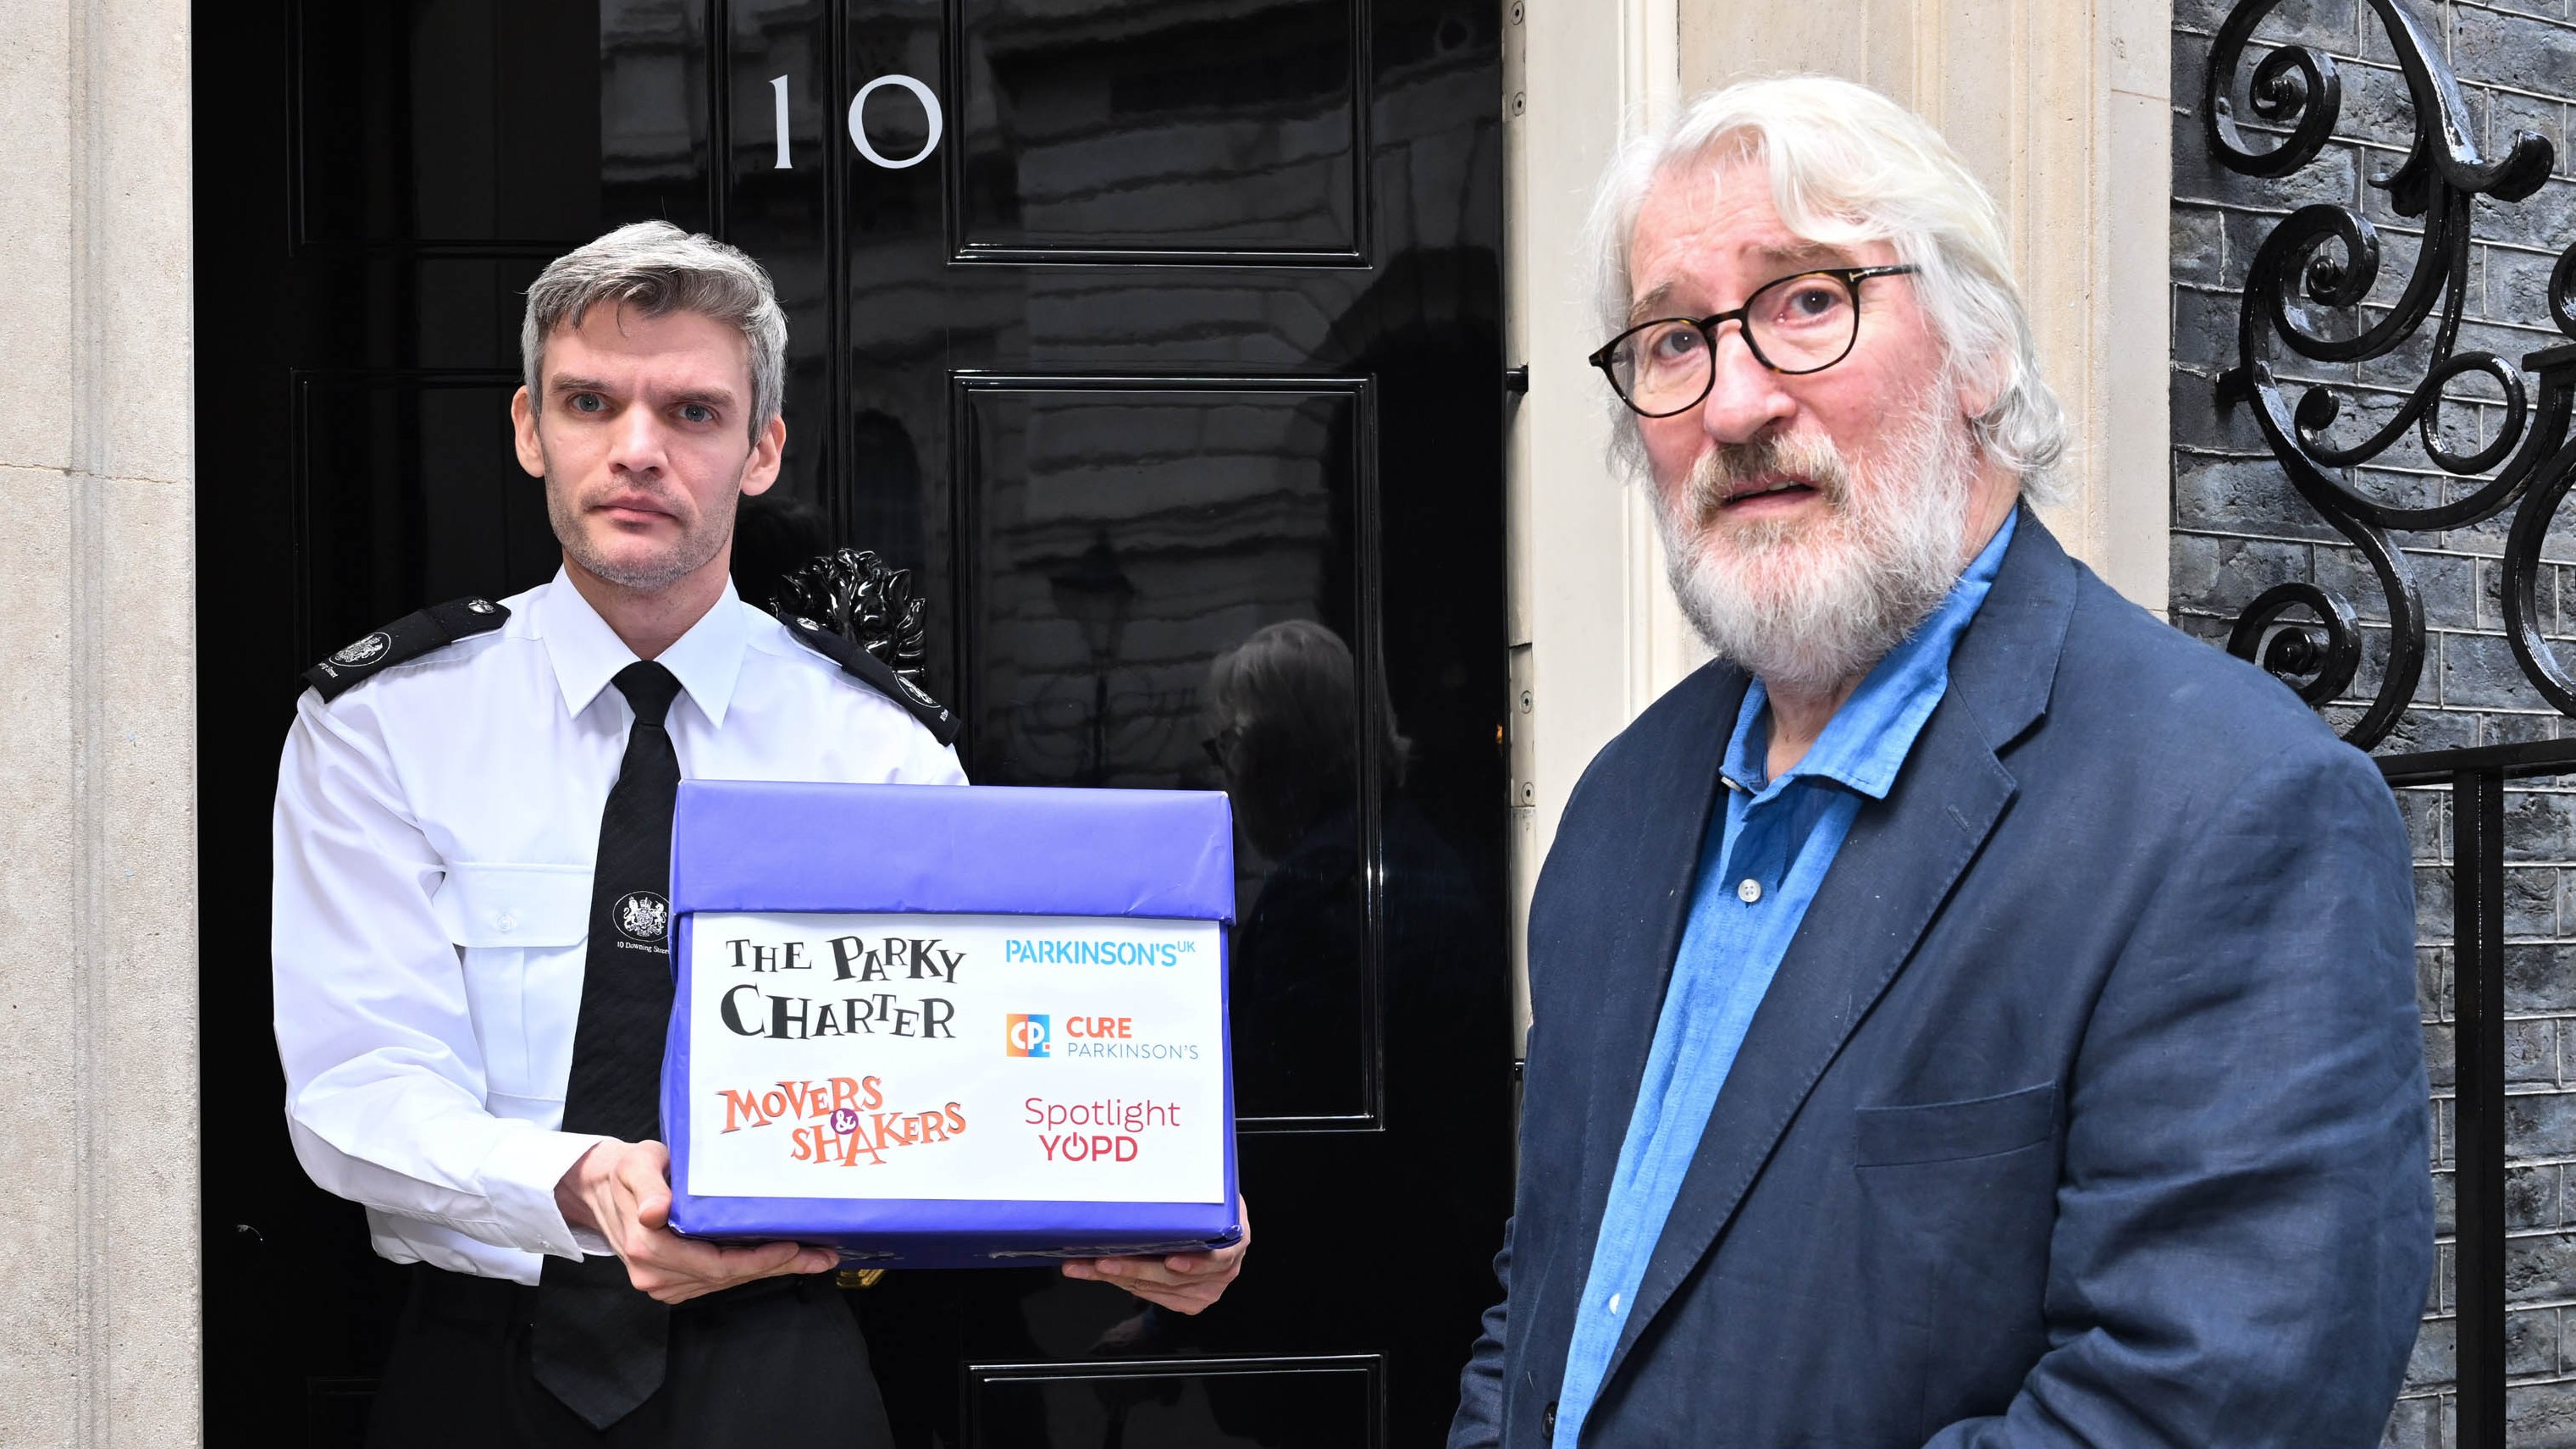 Jeremy Paxman marked World Parkinson’s Day by handing in the petition to Downing Street, asking for more support for people with the condition